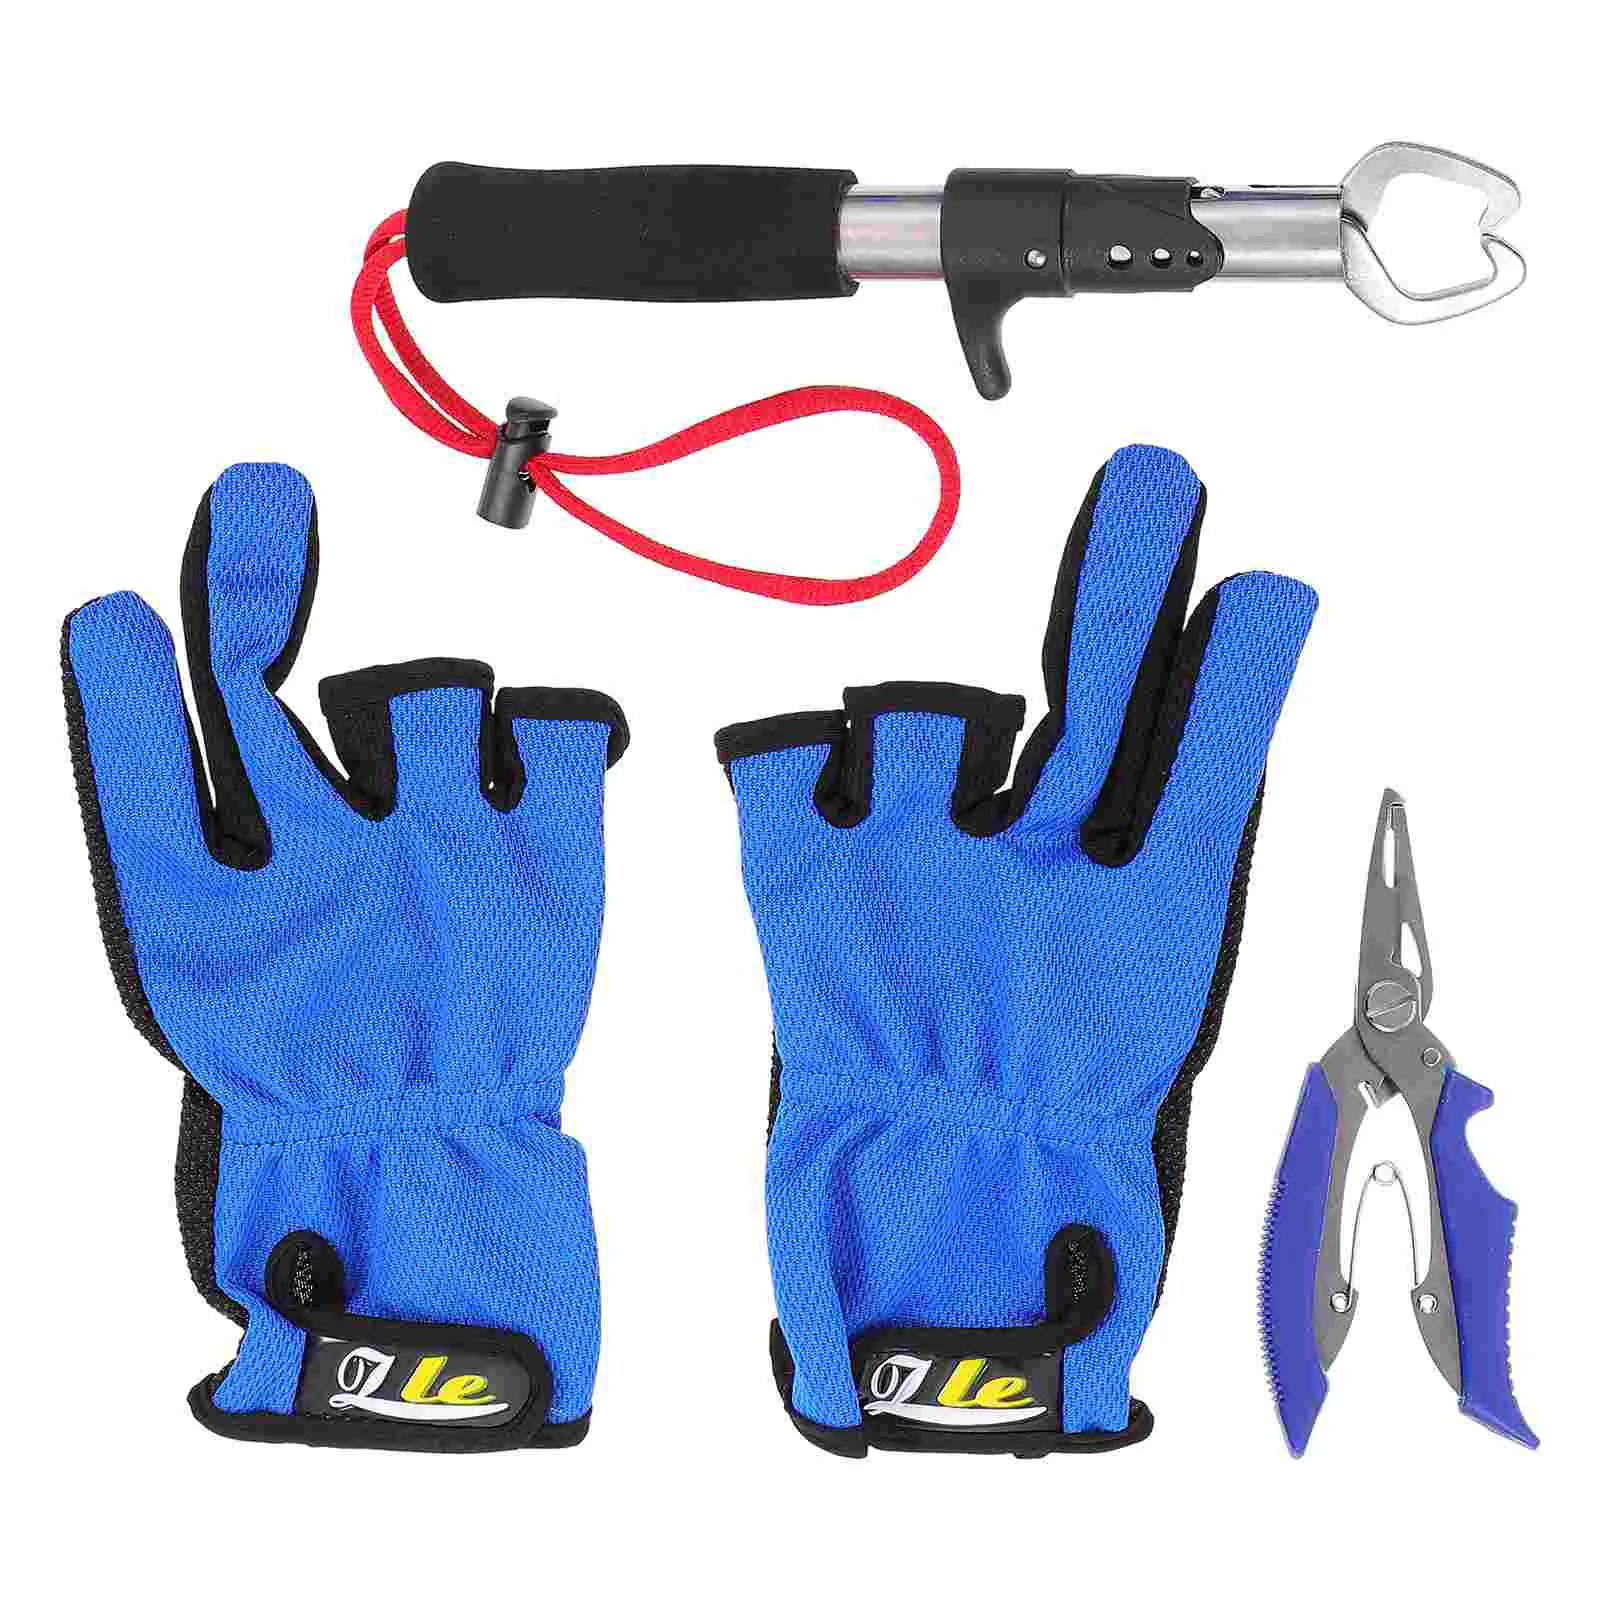 

Pliers Tool Tackle Controller Stainless Steel Ulti Functional Practical Kit Clamp Accessory Line Scissor Pocket knife